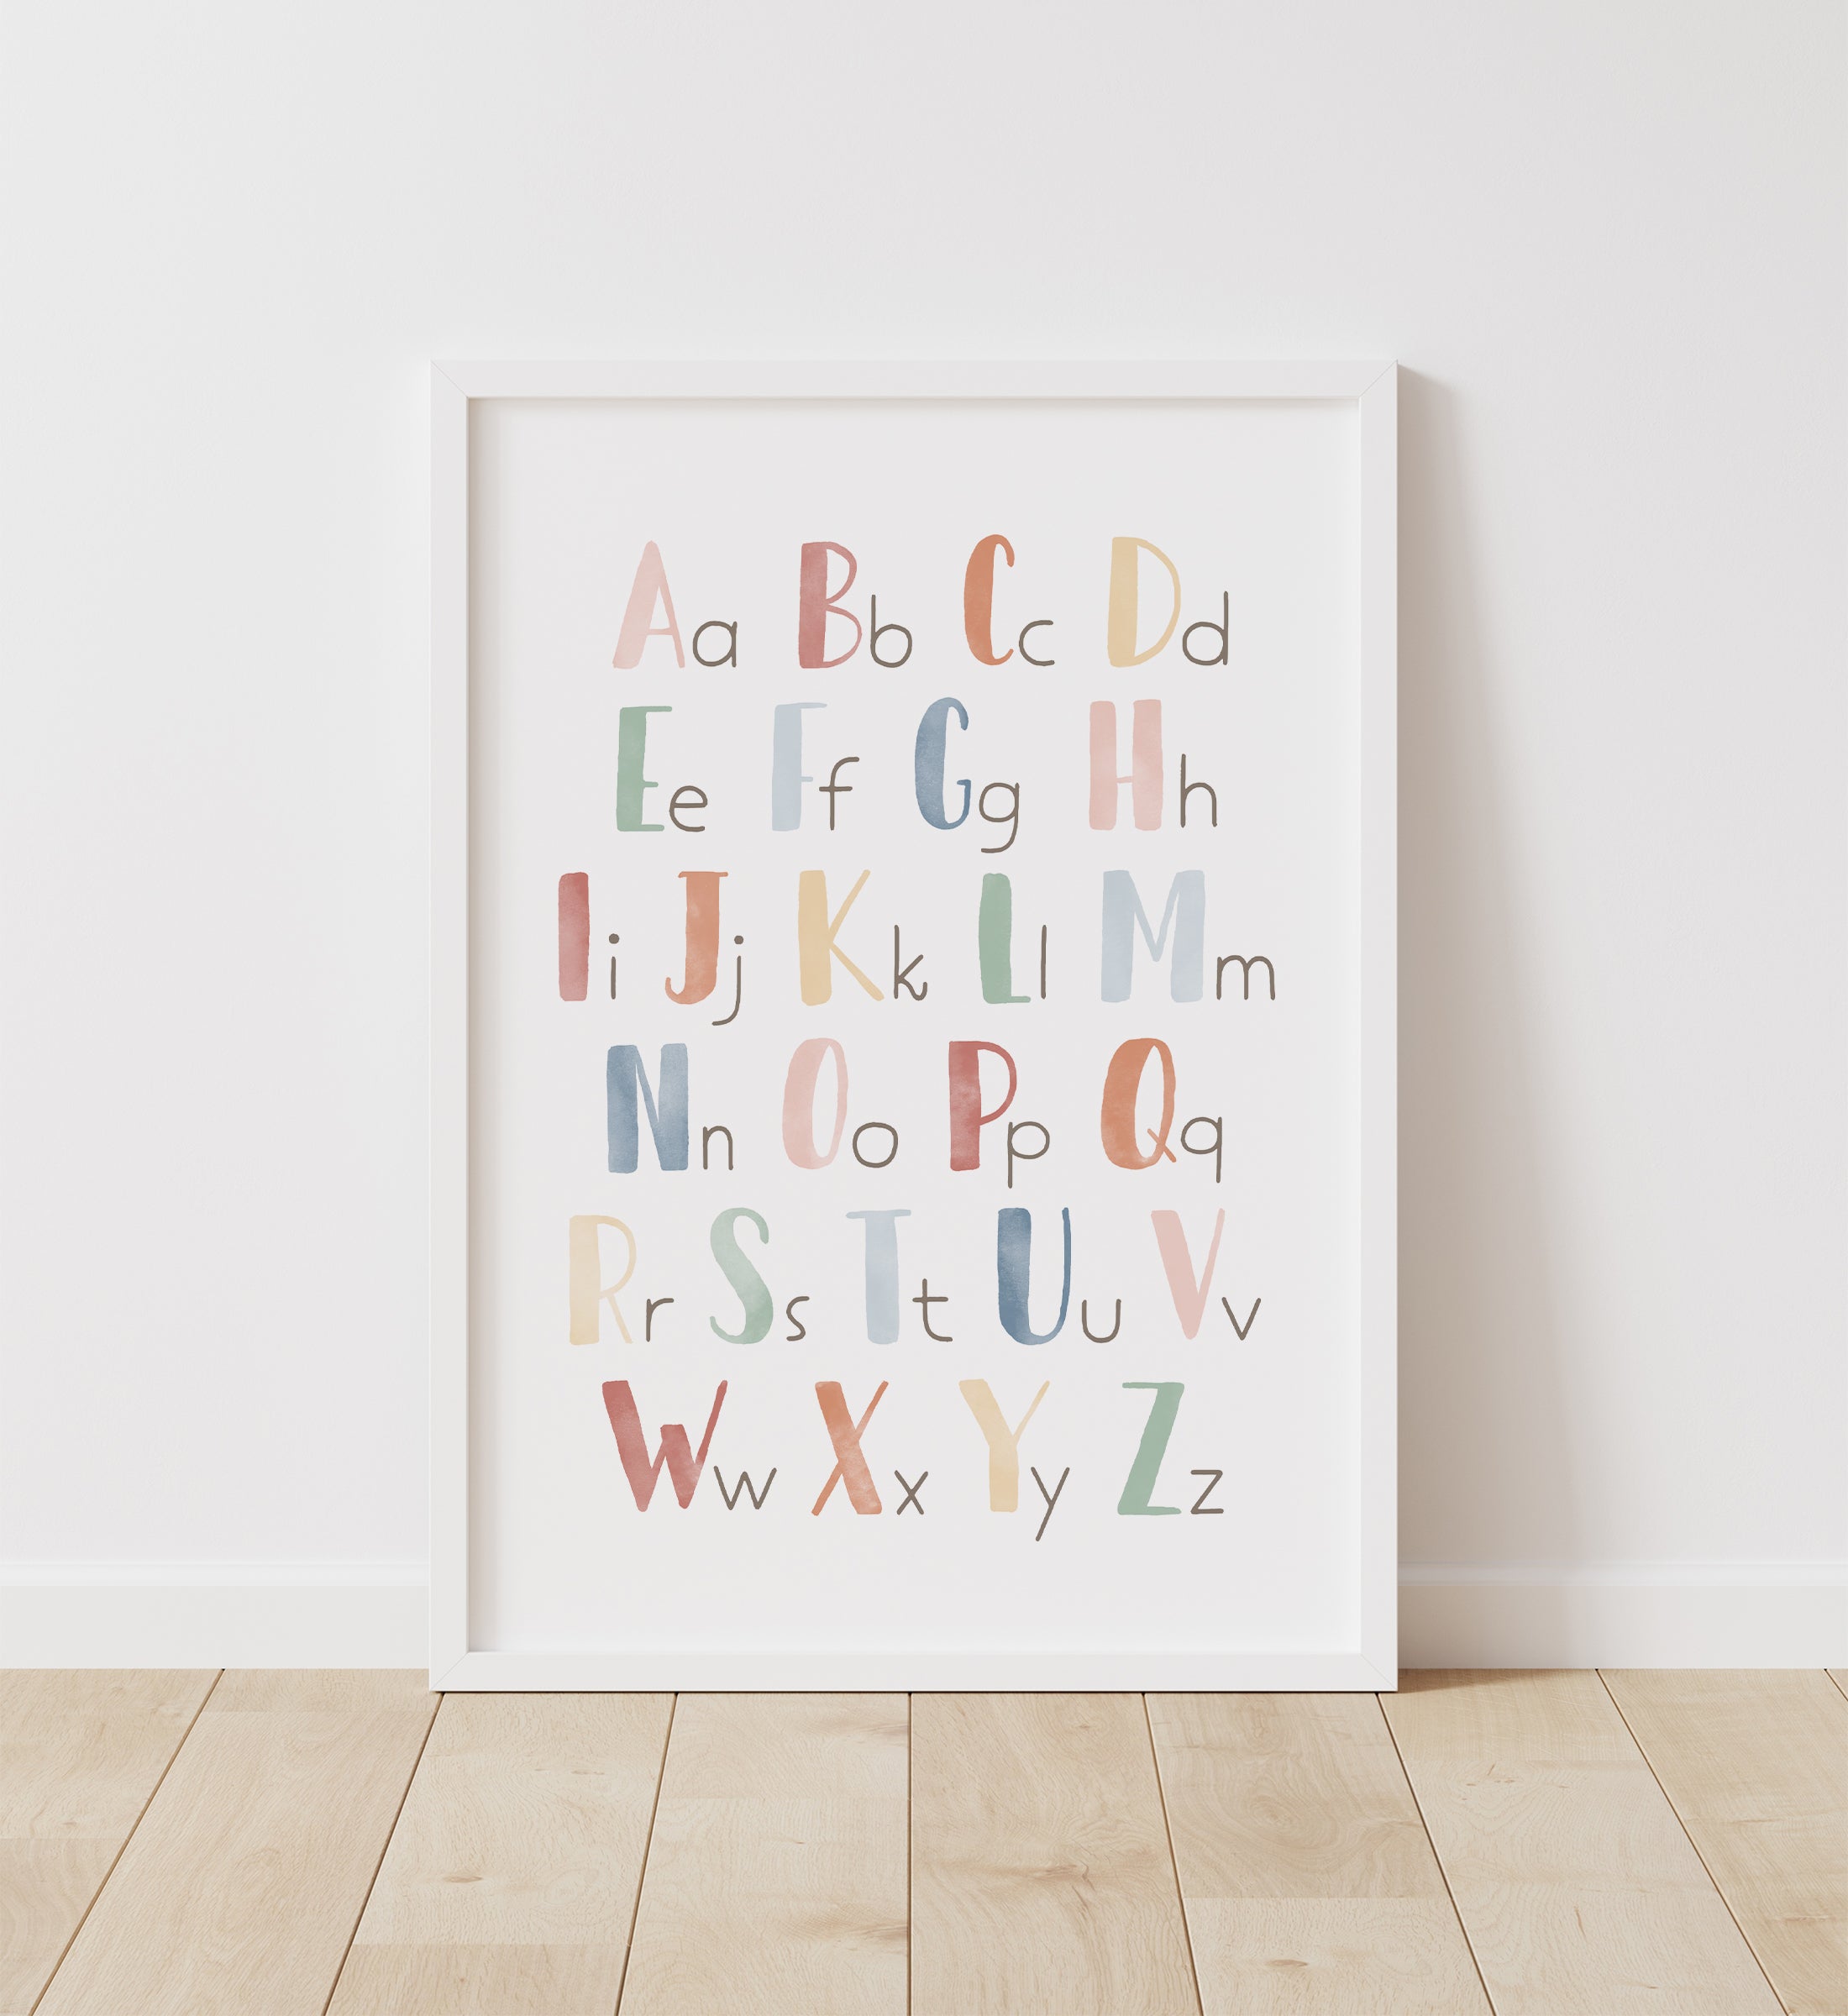 ALPHABET ABC LEARN YOUR LETTERS EDUCATIONAL POSTER PICTURE PRINT Sizes A5  to A0